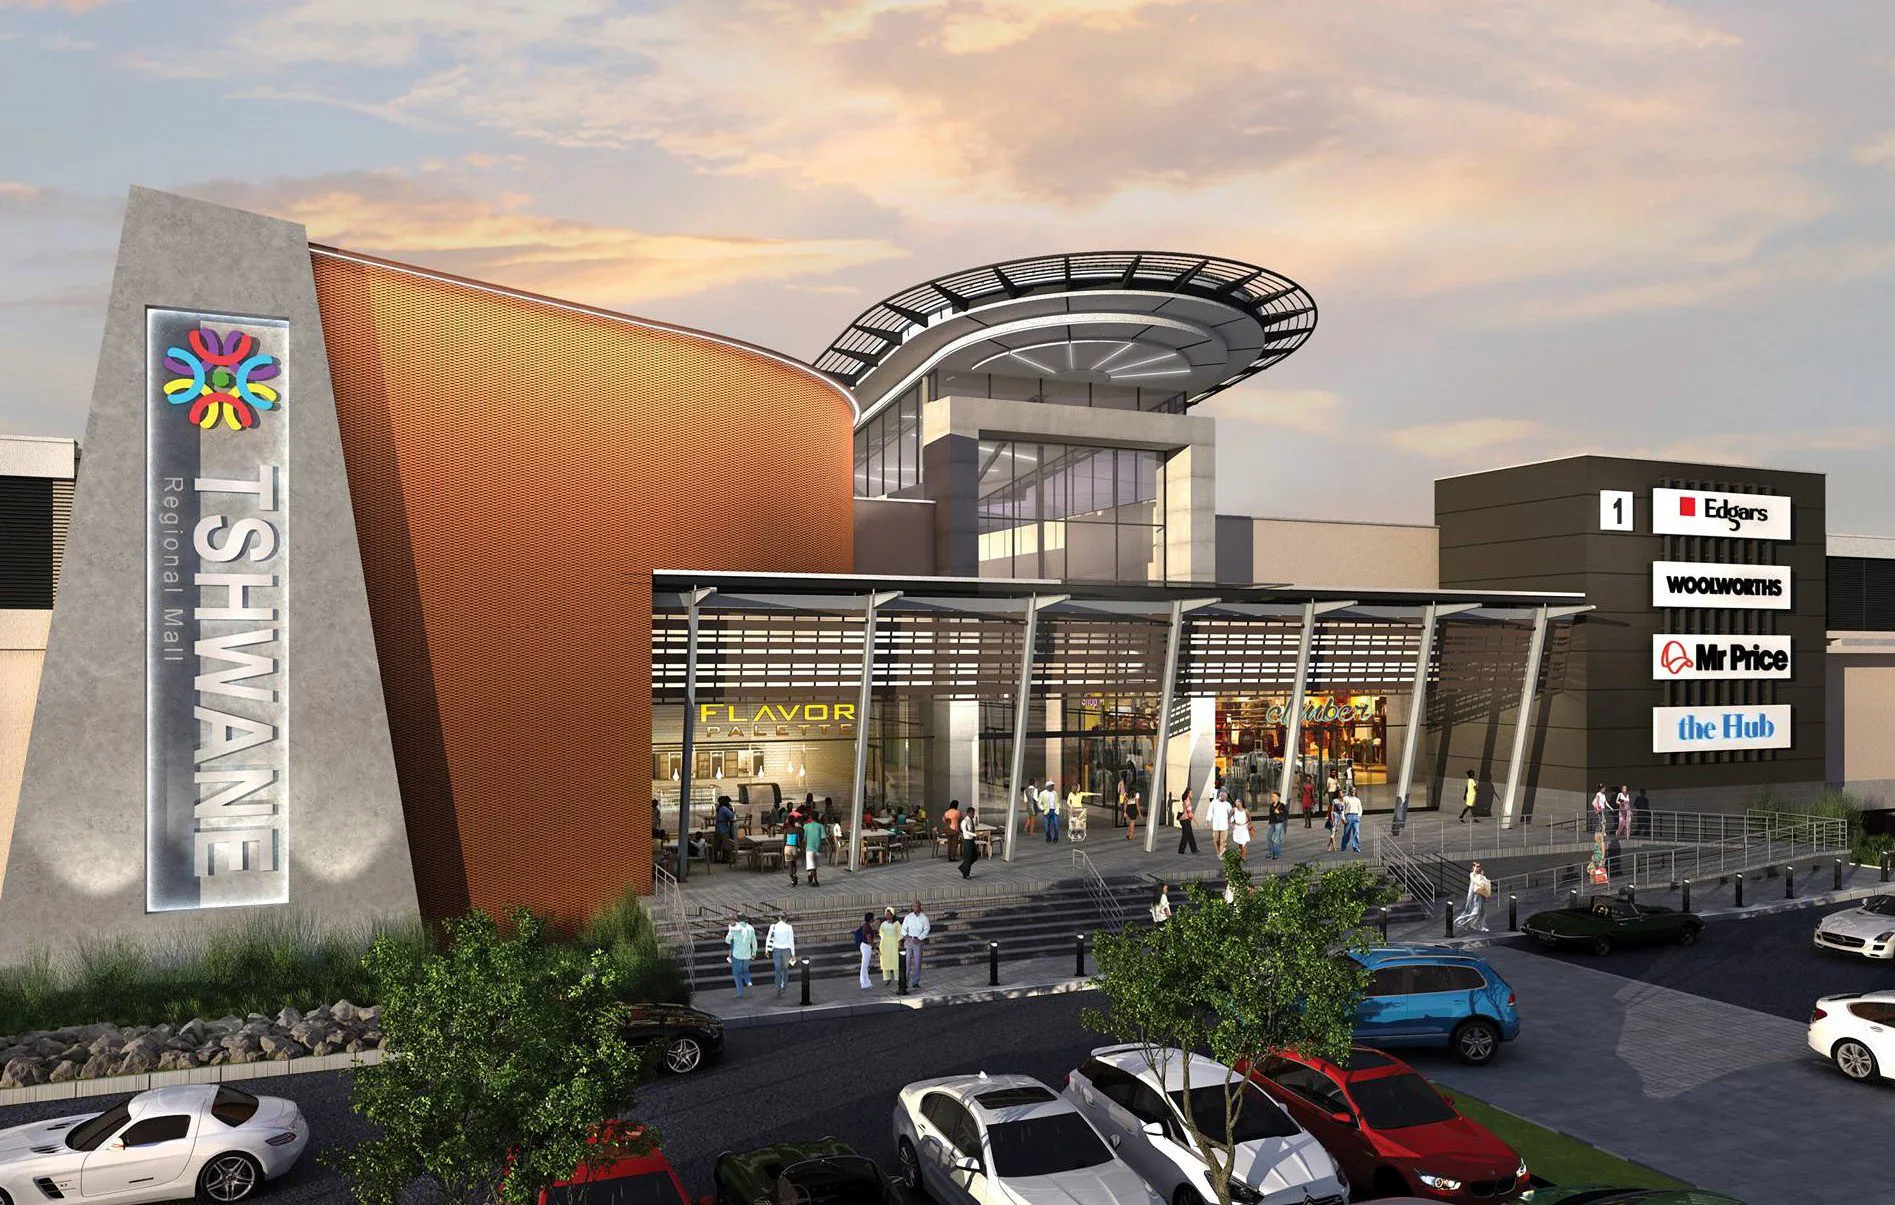 Tshwane Shopping Mall in South Africa, africa | Handbags,Shoes,Clothes,Gifts,Cosmetics,Jewelry - Country Helper